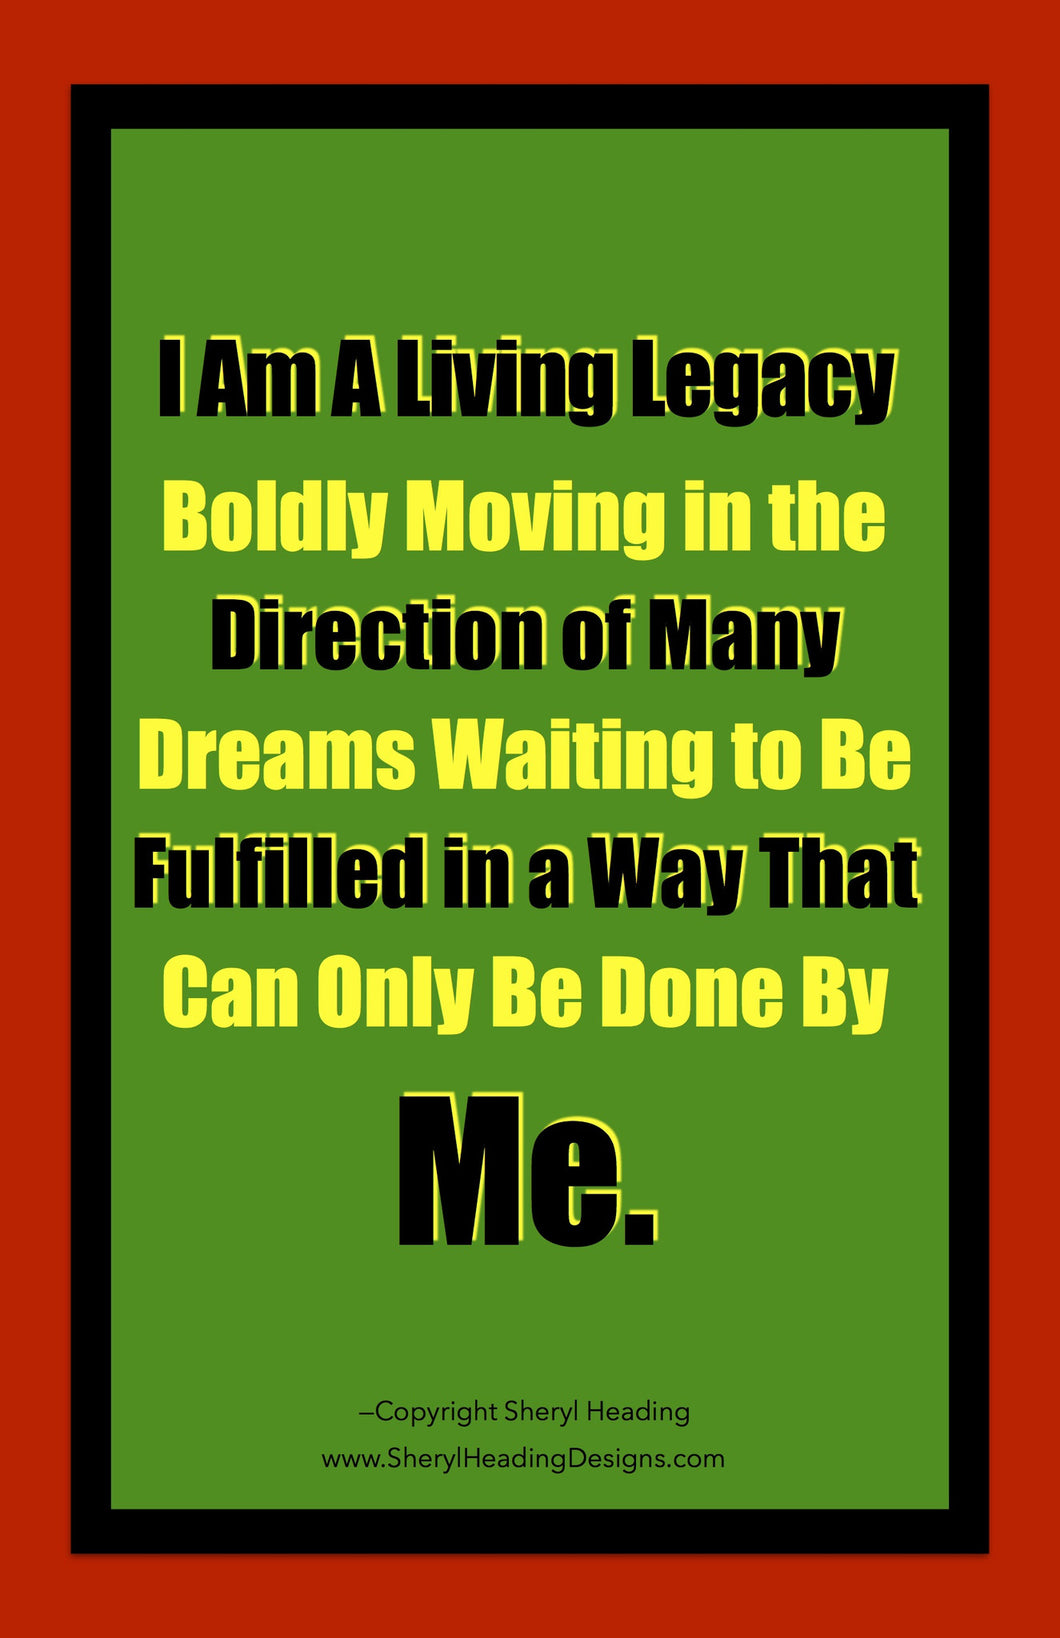 I Am A Living Legacy Boldly Moving in the Direction of Many Dreams Waiting to Be Fulfilled By Me Poster - Sheryl Heading Designs